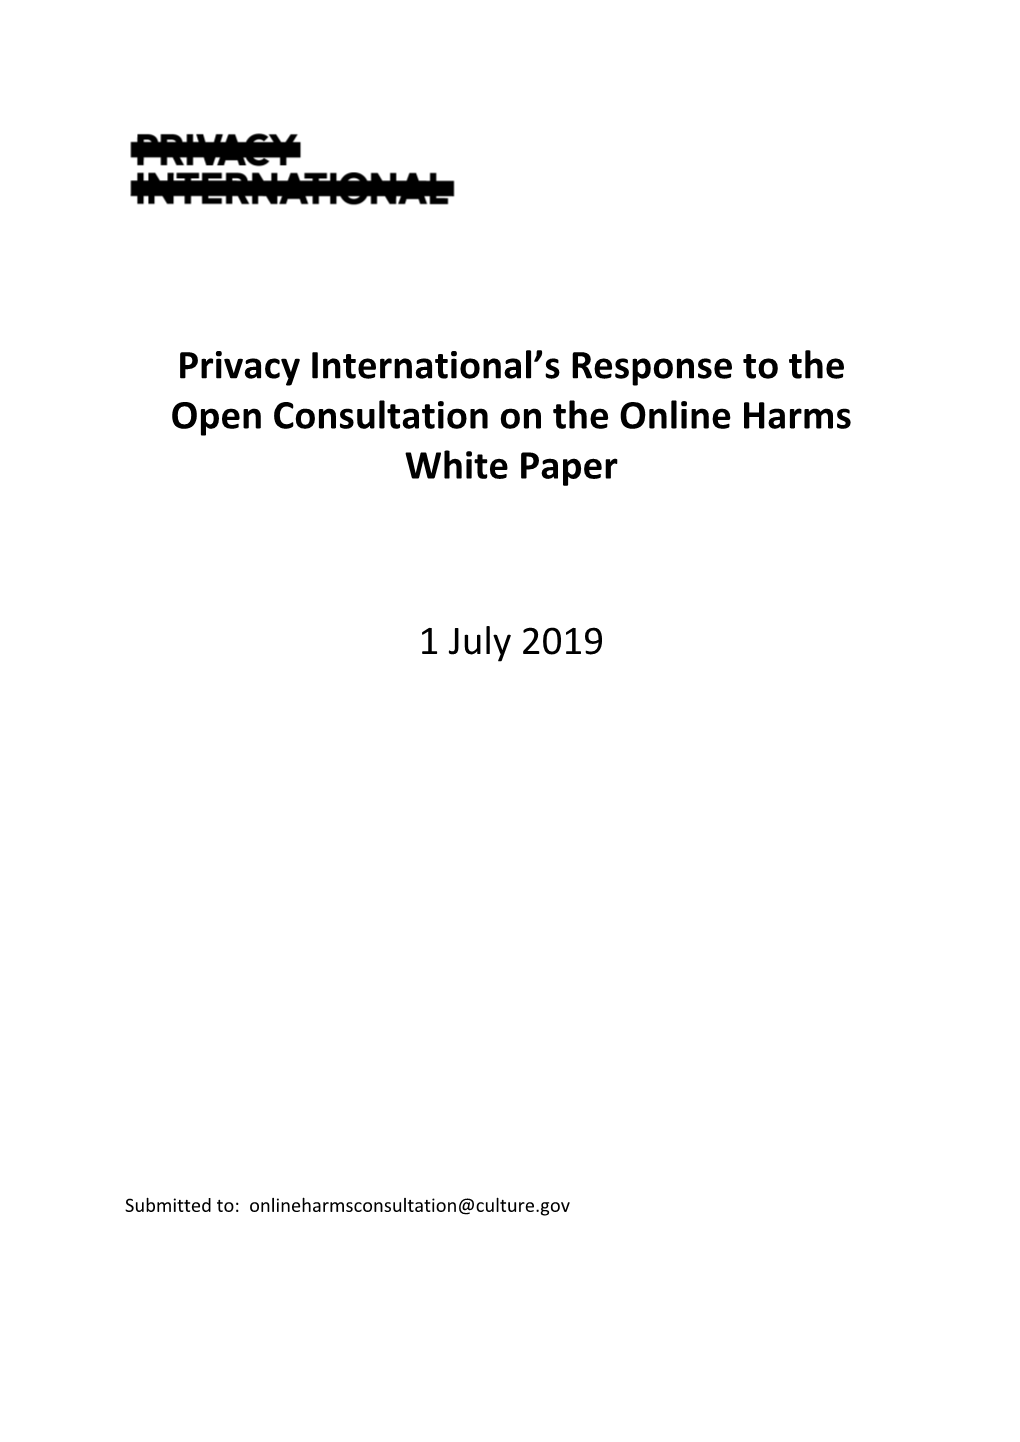 Response to the Open Consultation on the Online Harms White Paper